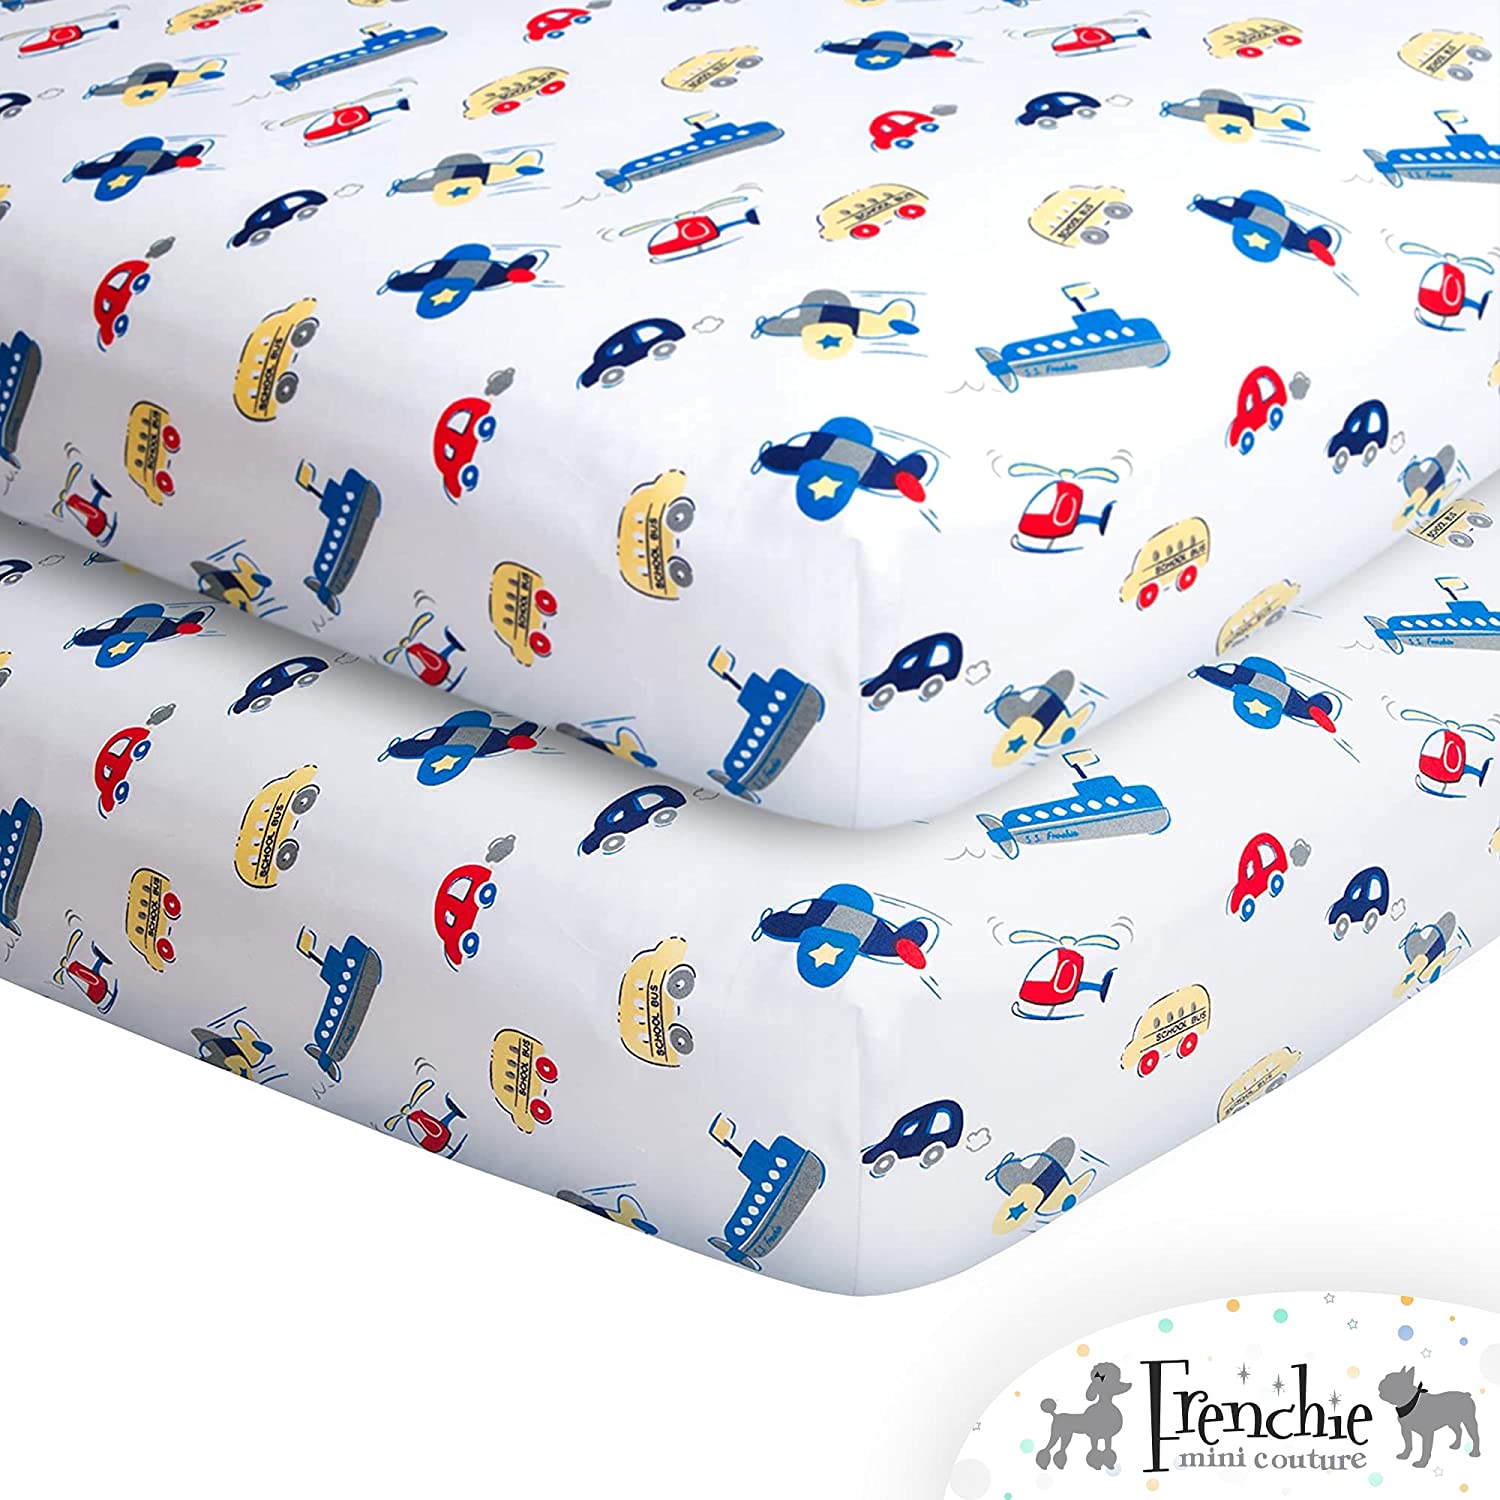 Crib Fitted Sheet for Boys & Girls 100% Woven Cotton, Cars, Boats, Planes, 28 x 52 x 8in, 2-Pack